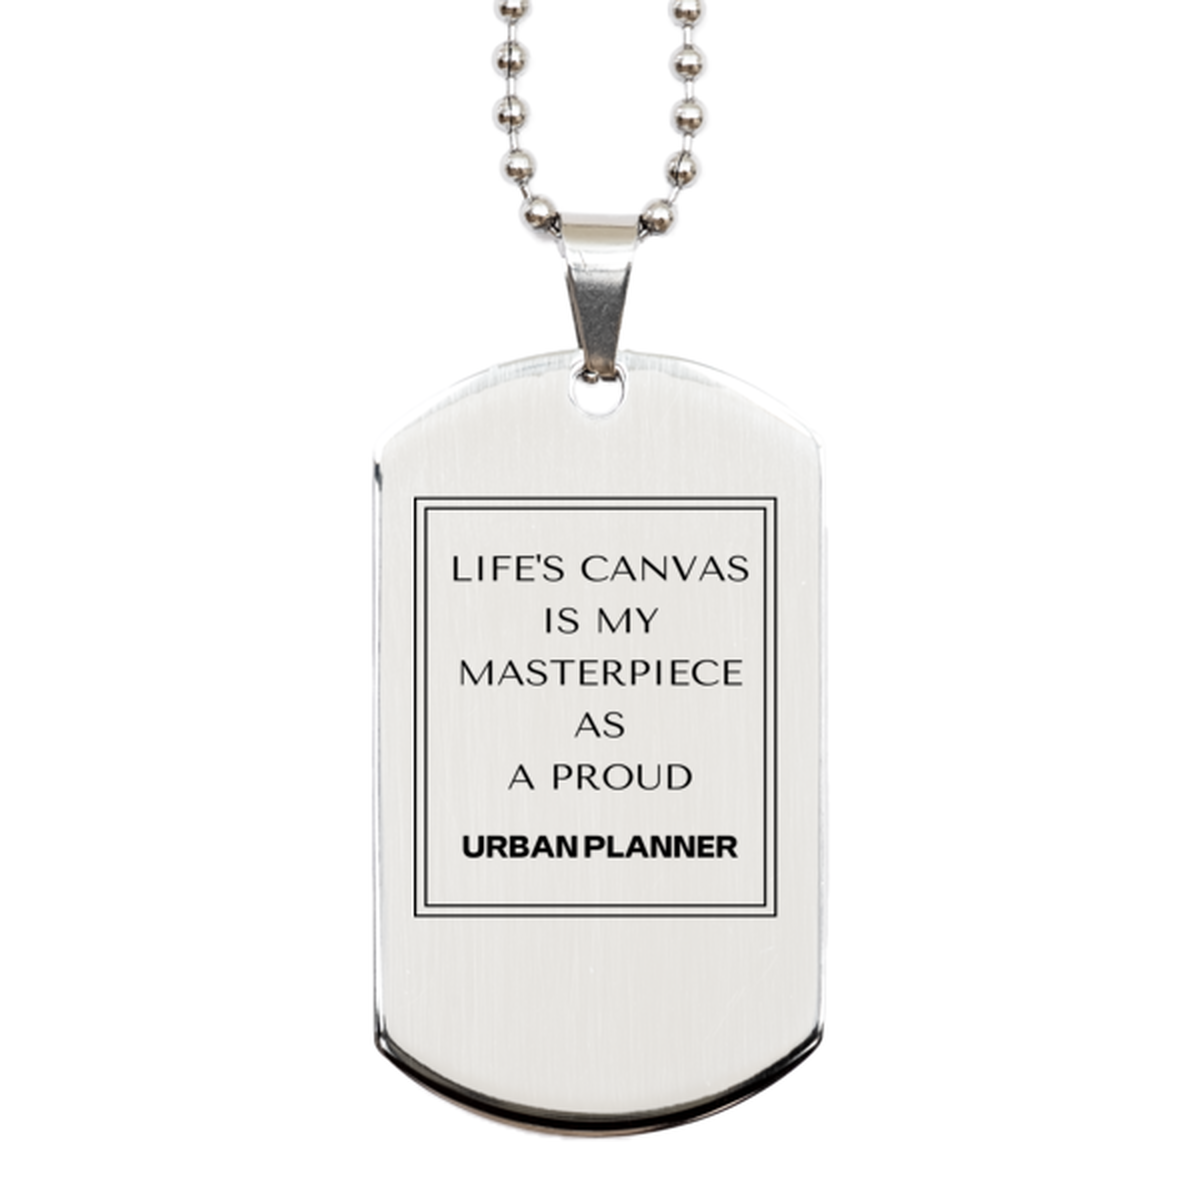 Proud Urban Planner Gifts, Life's canvas is my masterpiece, Epic Birthday Christmas Unique Silver Dog Tag For Urban Planner, Coworkers, Men, Women, Friends